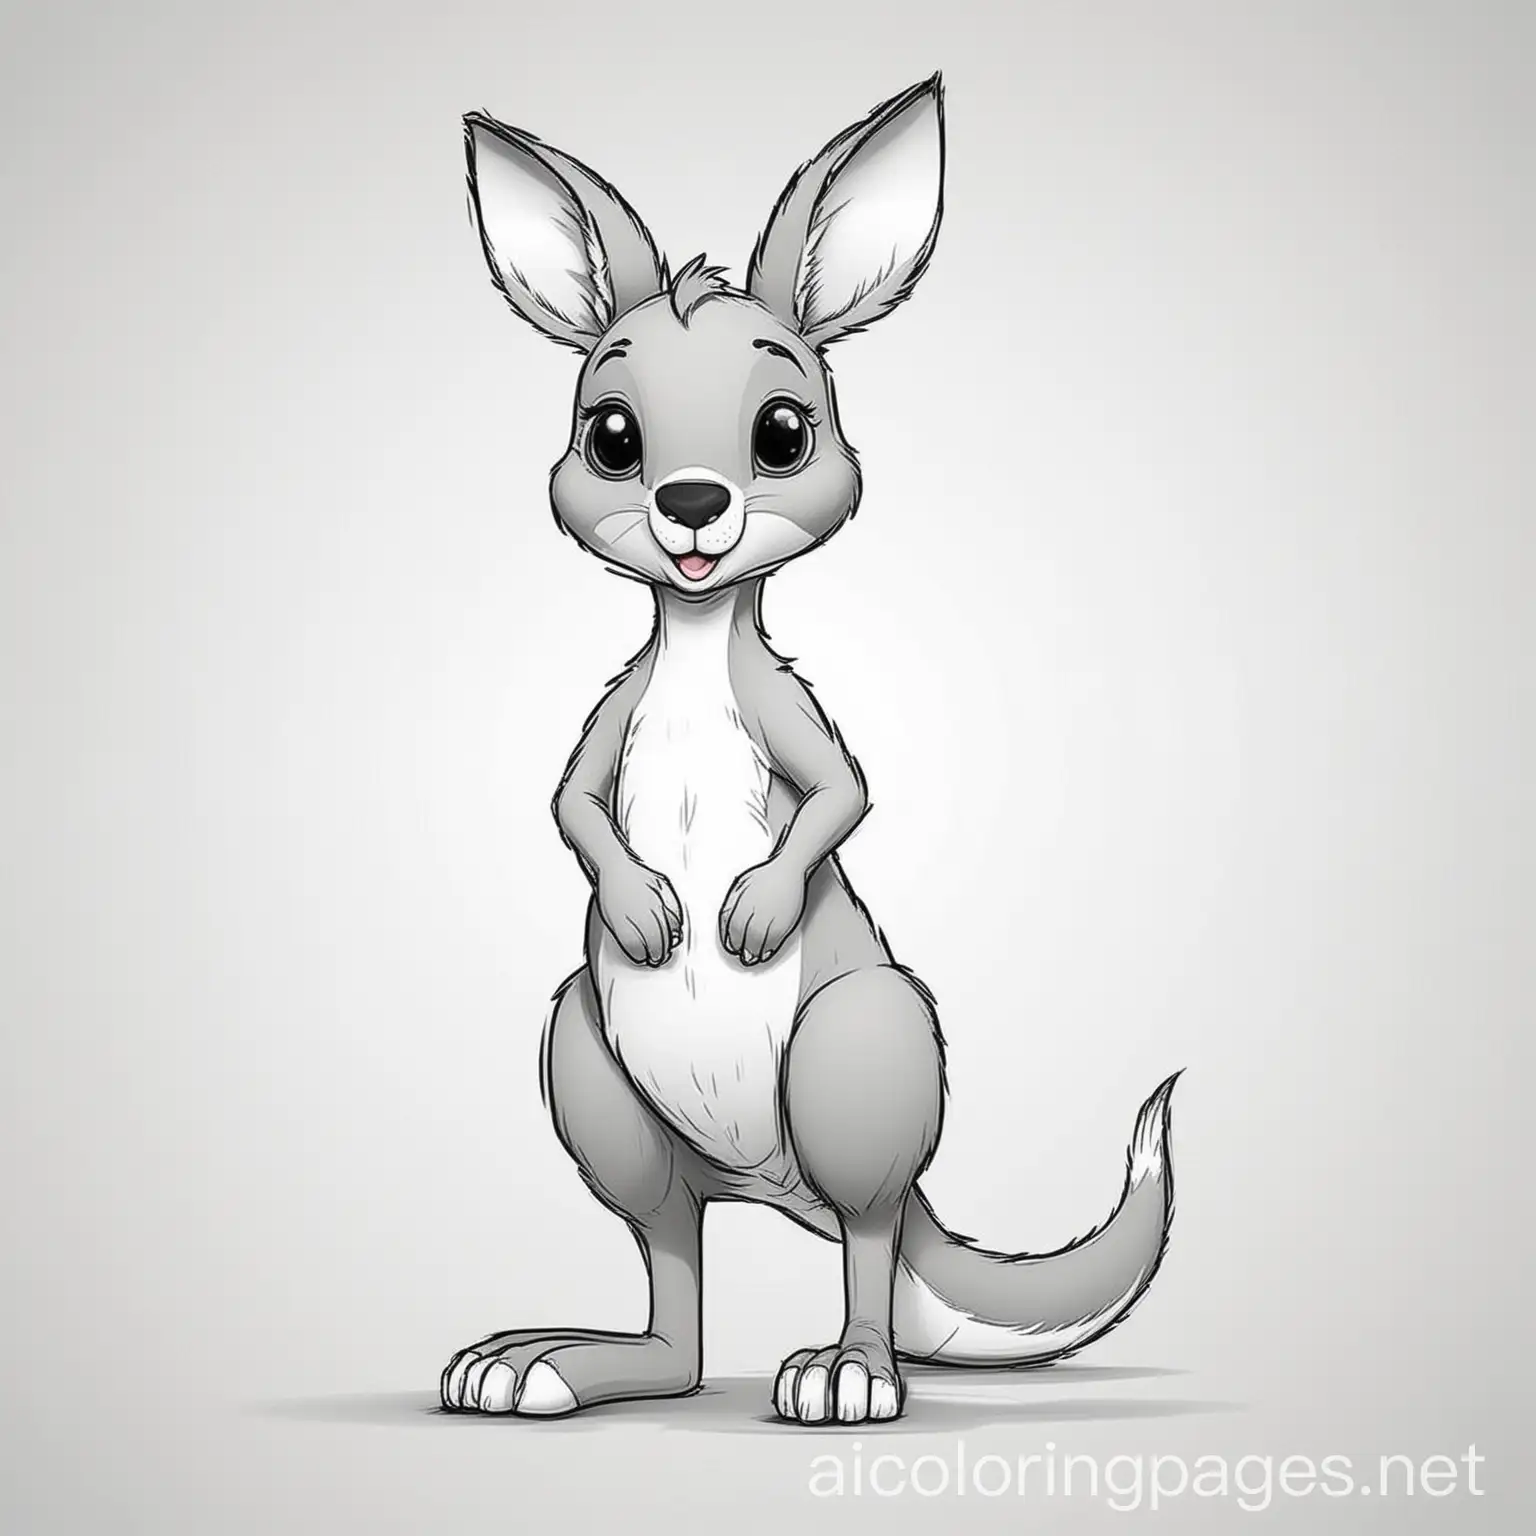 happy funny cute cartoon  kangaroo standing side view
, Coloring Page, black and white, line art, white background, Simplicity, Ample White Space. The background of the coloring page is plain white to make it easy for young children to color within the lines. The outlines of all the subjects are easy to distinguish, making it simple for kids to color without too much difficulty